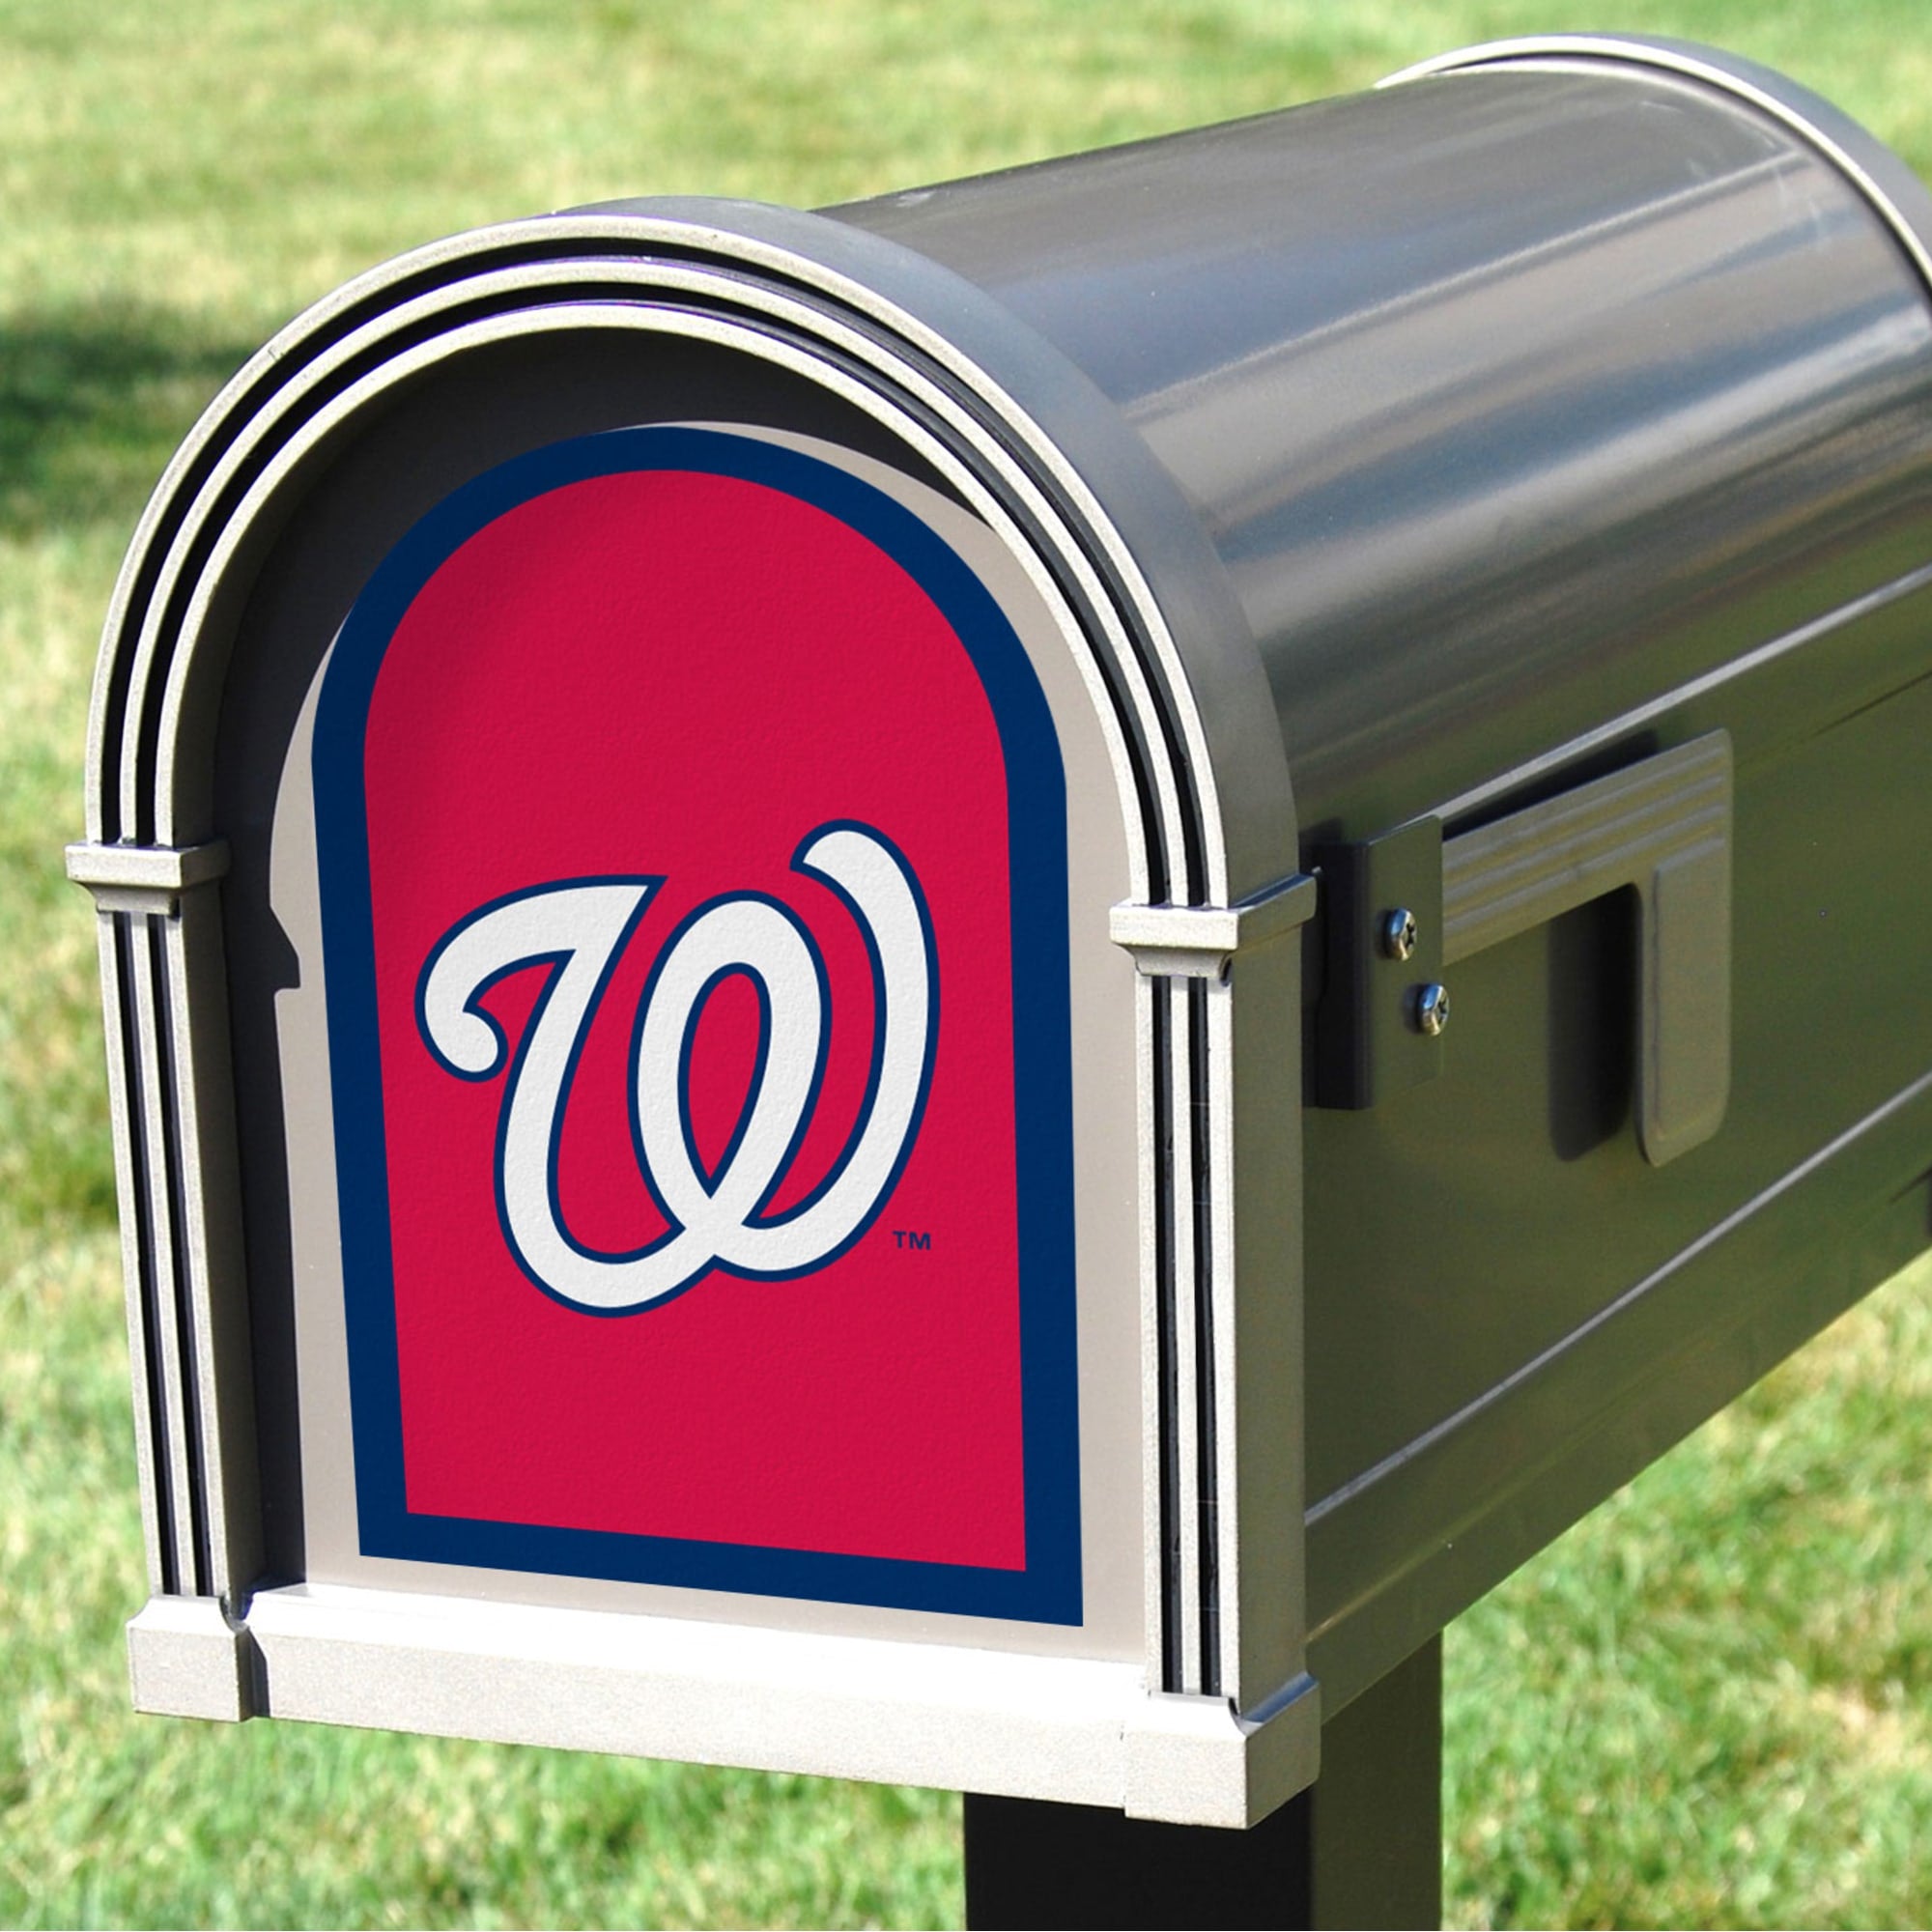 Washington Nationals: Mailbox Logo - Officially Licensed MLB Outdoor Graphic 5.0"W x 8.0"H by Fathead | Wood/Aluminum